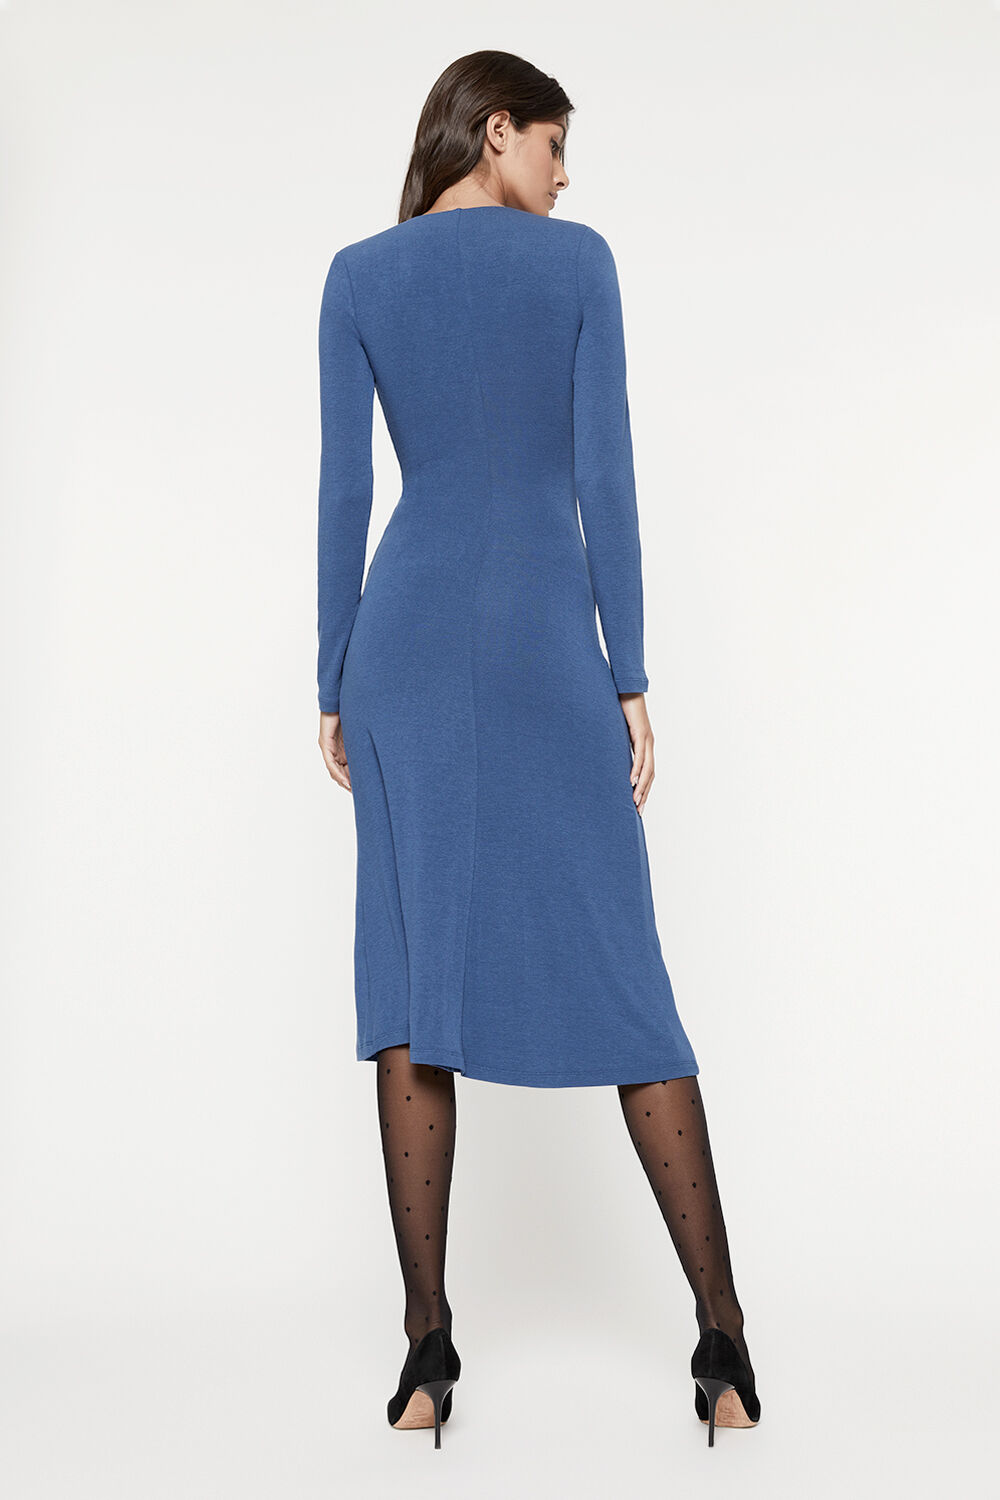 RUCHED JERSEY DRESS  in colour BLUEBIRD